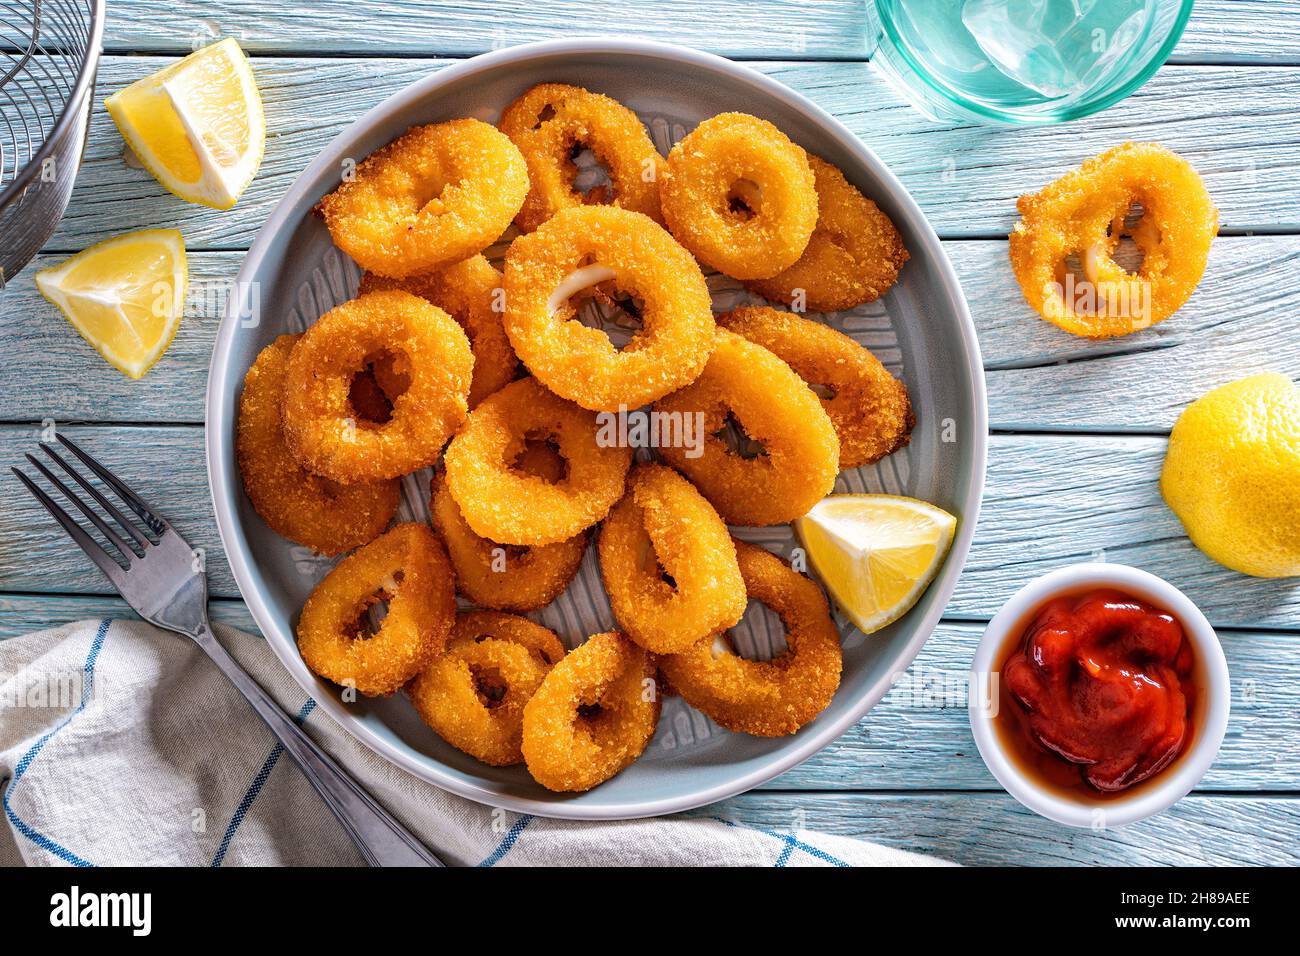 Delicious crispy breaded and fried calamari with lemon and seafood sauce. Stock Photo